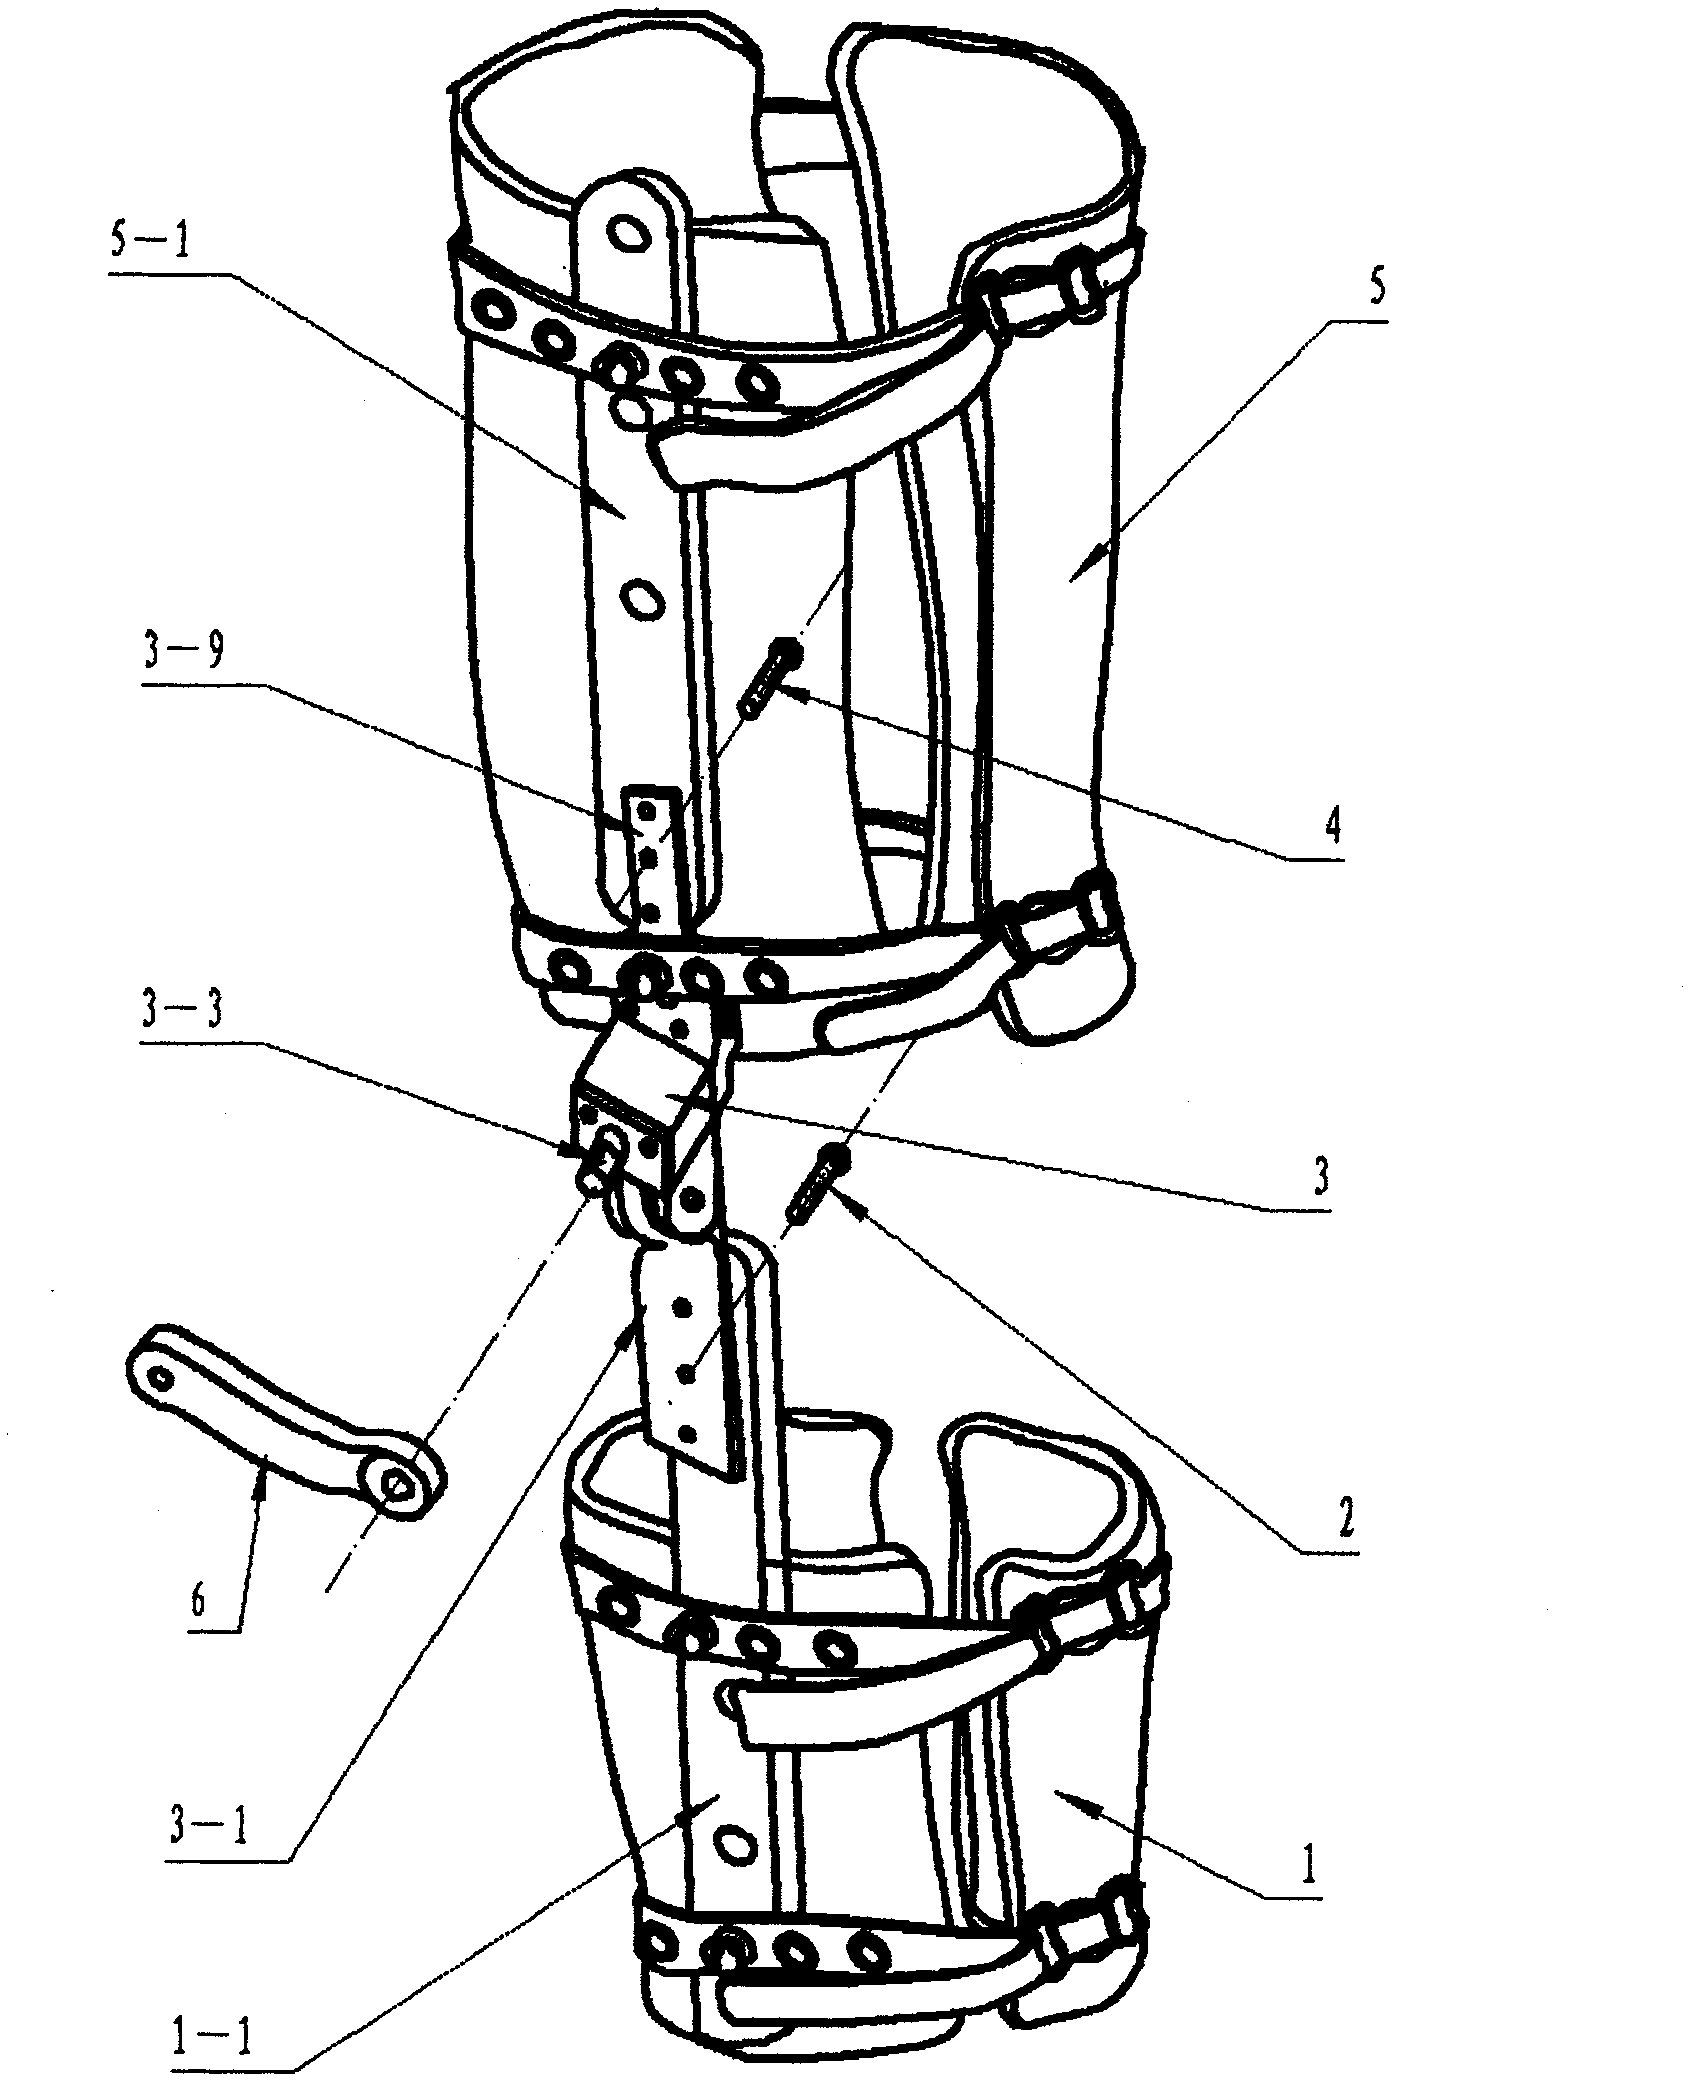 External artificial knee joint-noninvasive correction device for knee joint osteoarthropathy